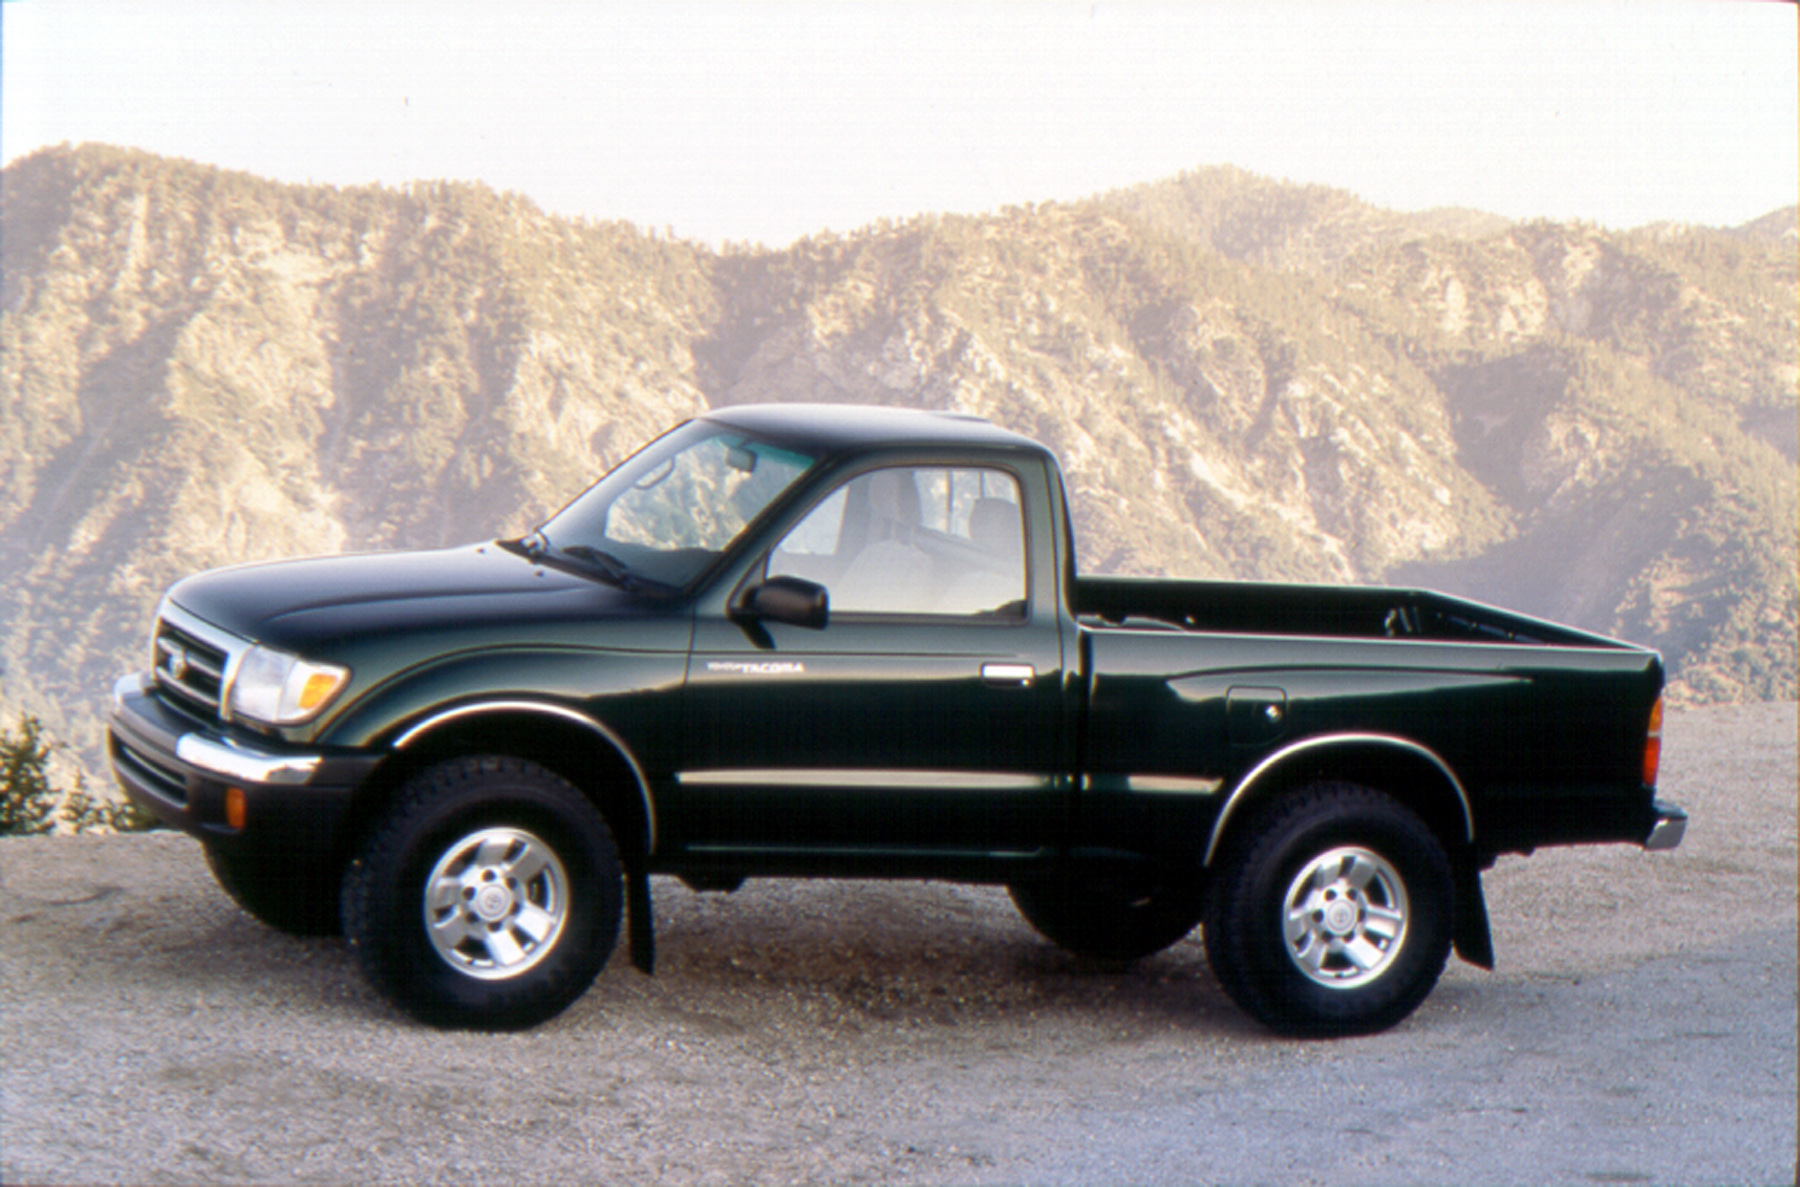 2000 Toyota Tacoma Review Carfax Vehicle Research